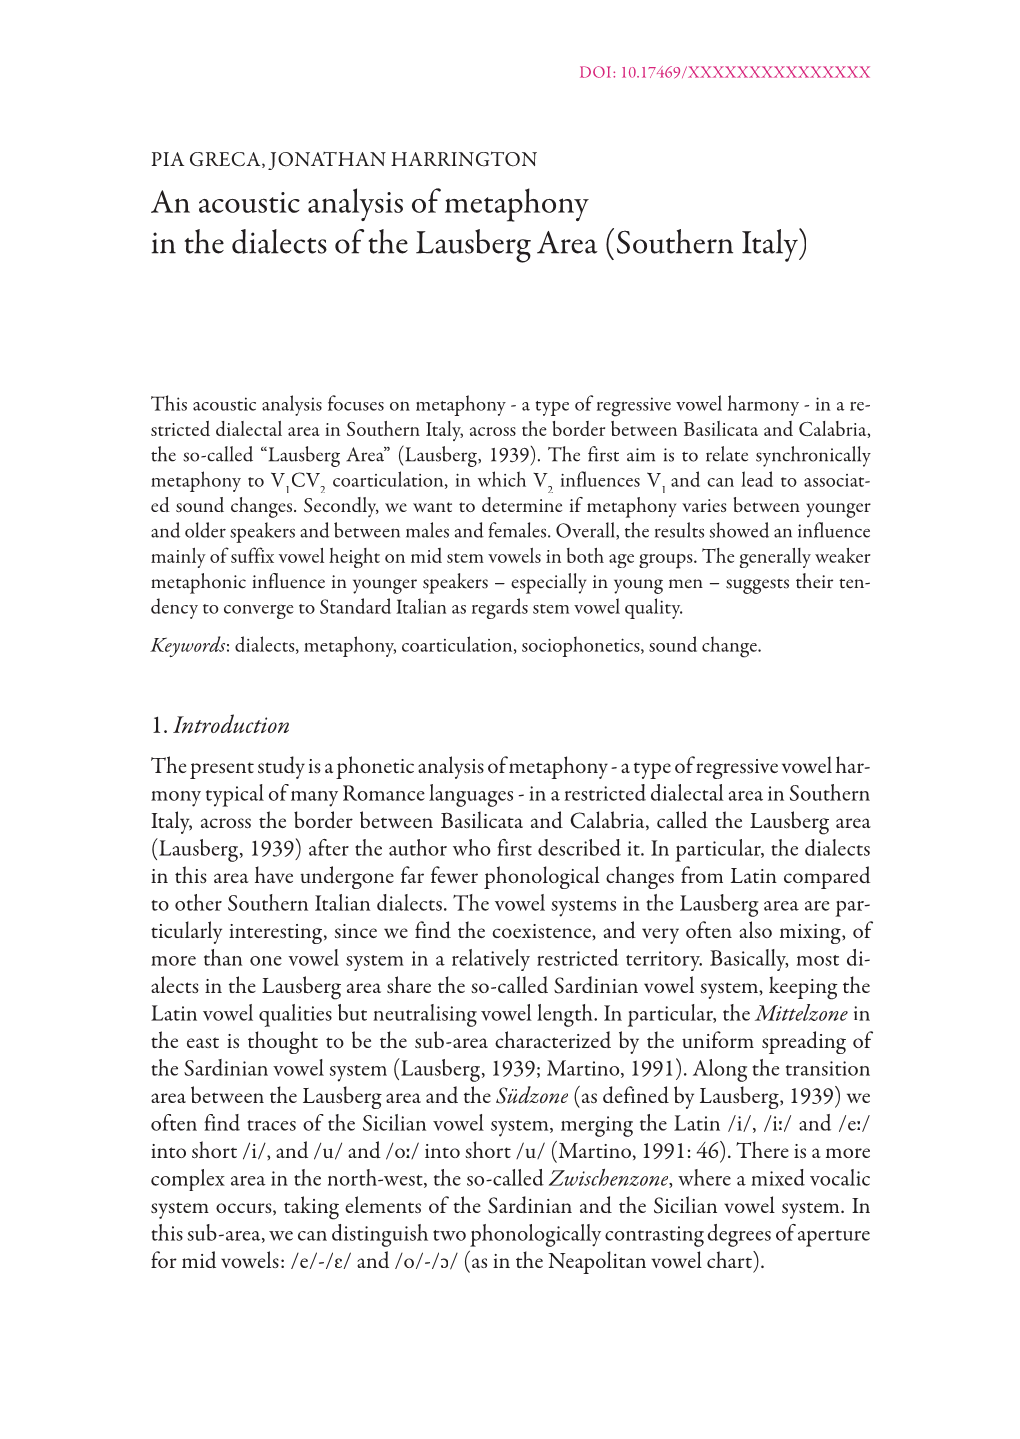 An Acoustic Analysis of Metaphony in the Dialects of the Lausberg Area (Southern Italy)